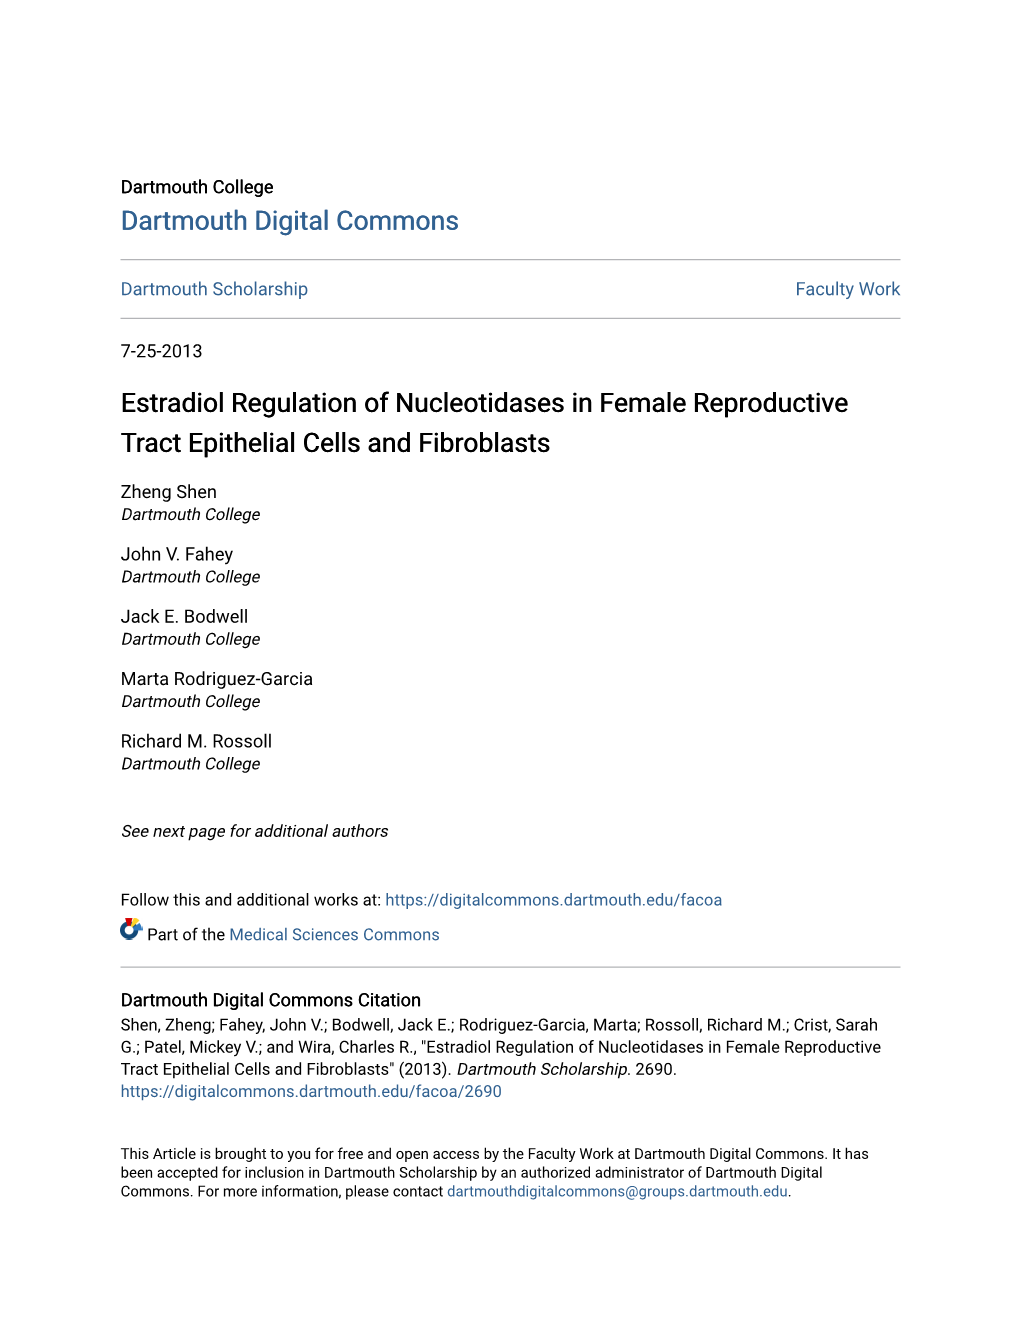 Estradiol Regulation of Nucleotidases in Female Reproductive Tract Epithelial Cells and Fibroblasts